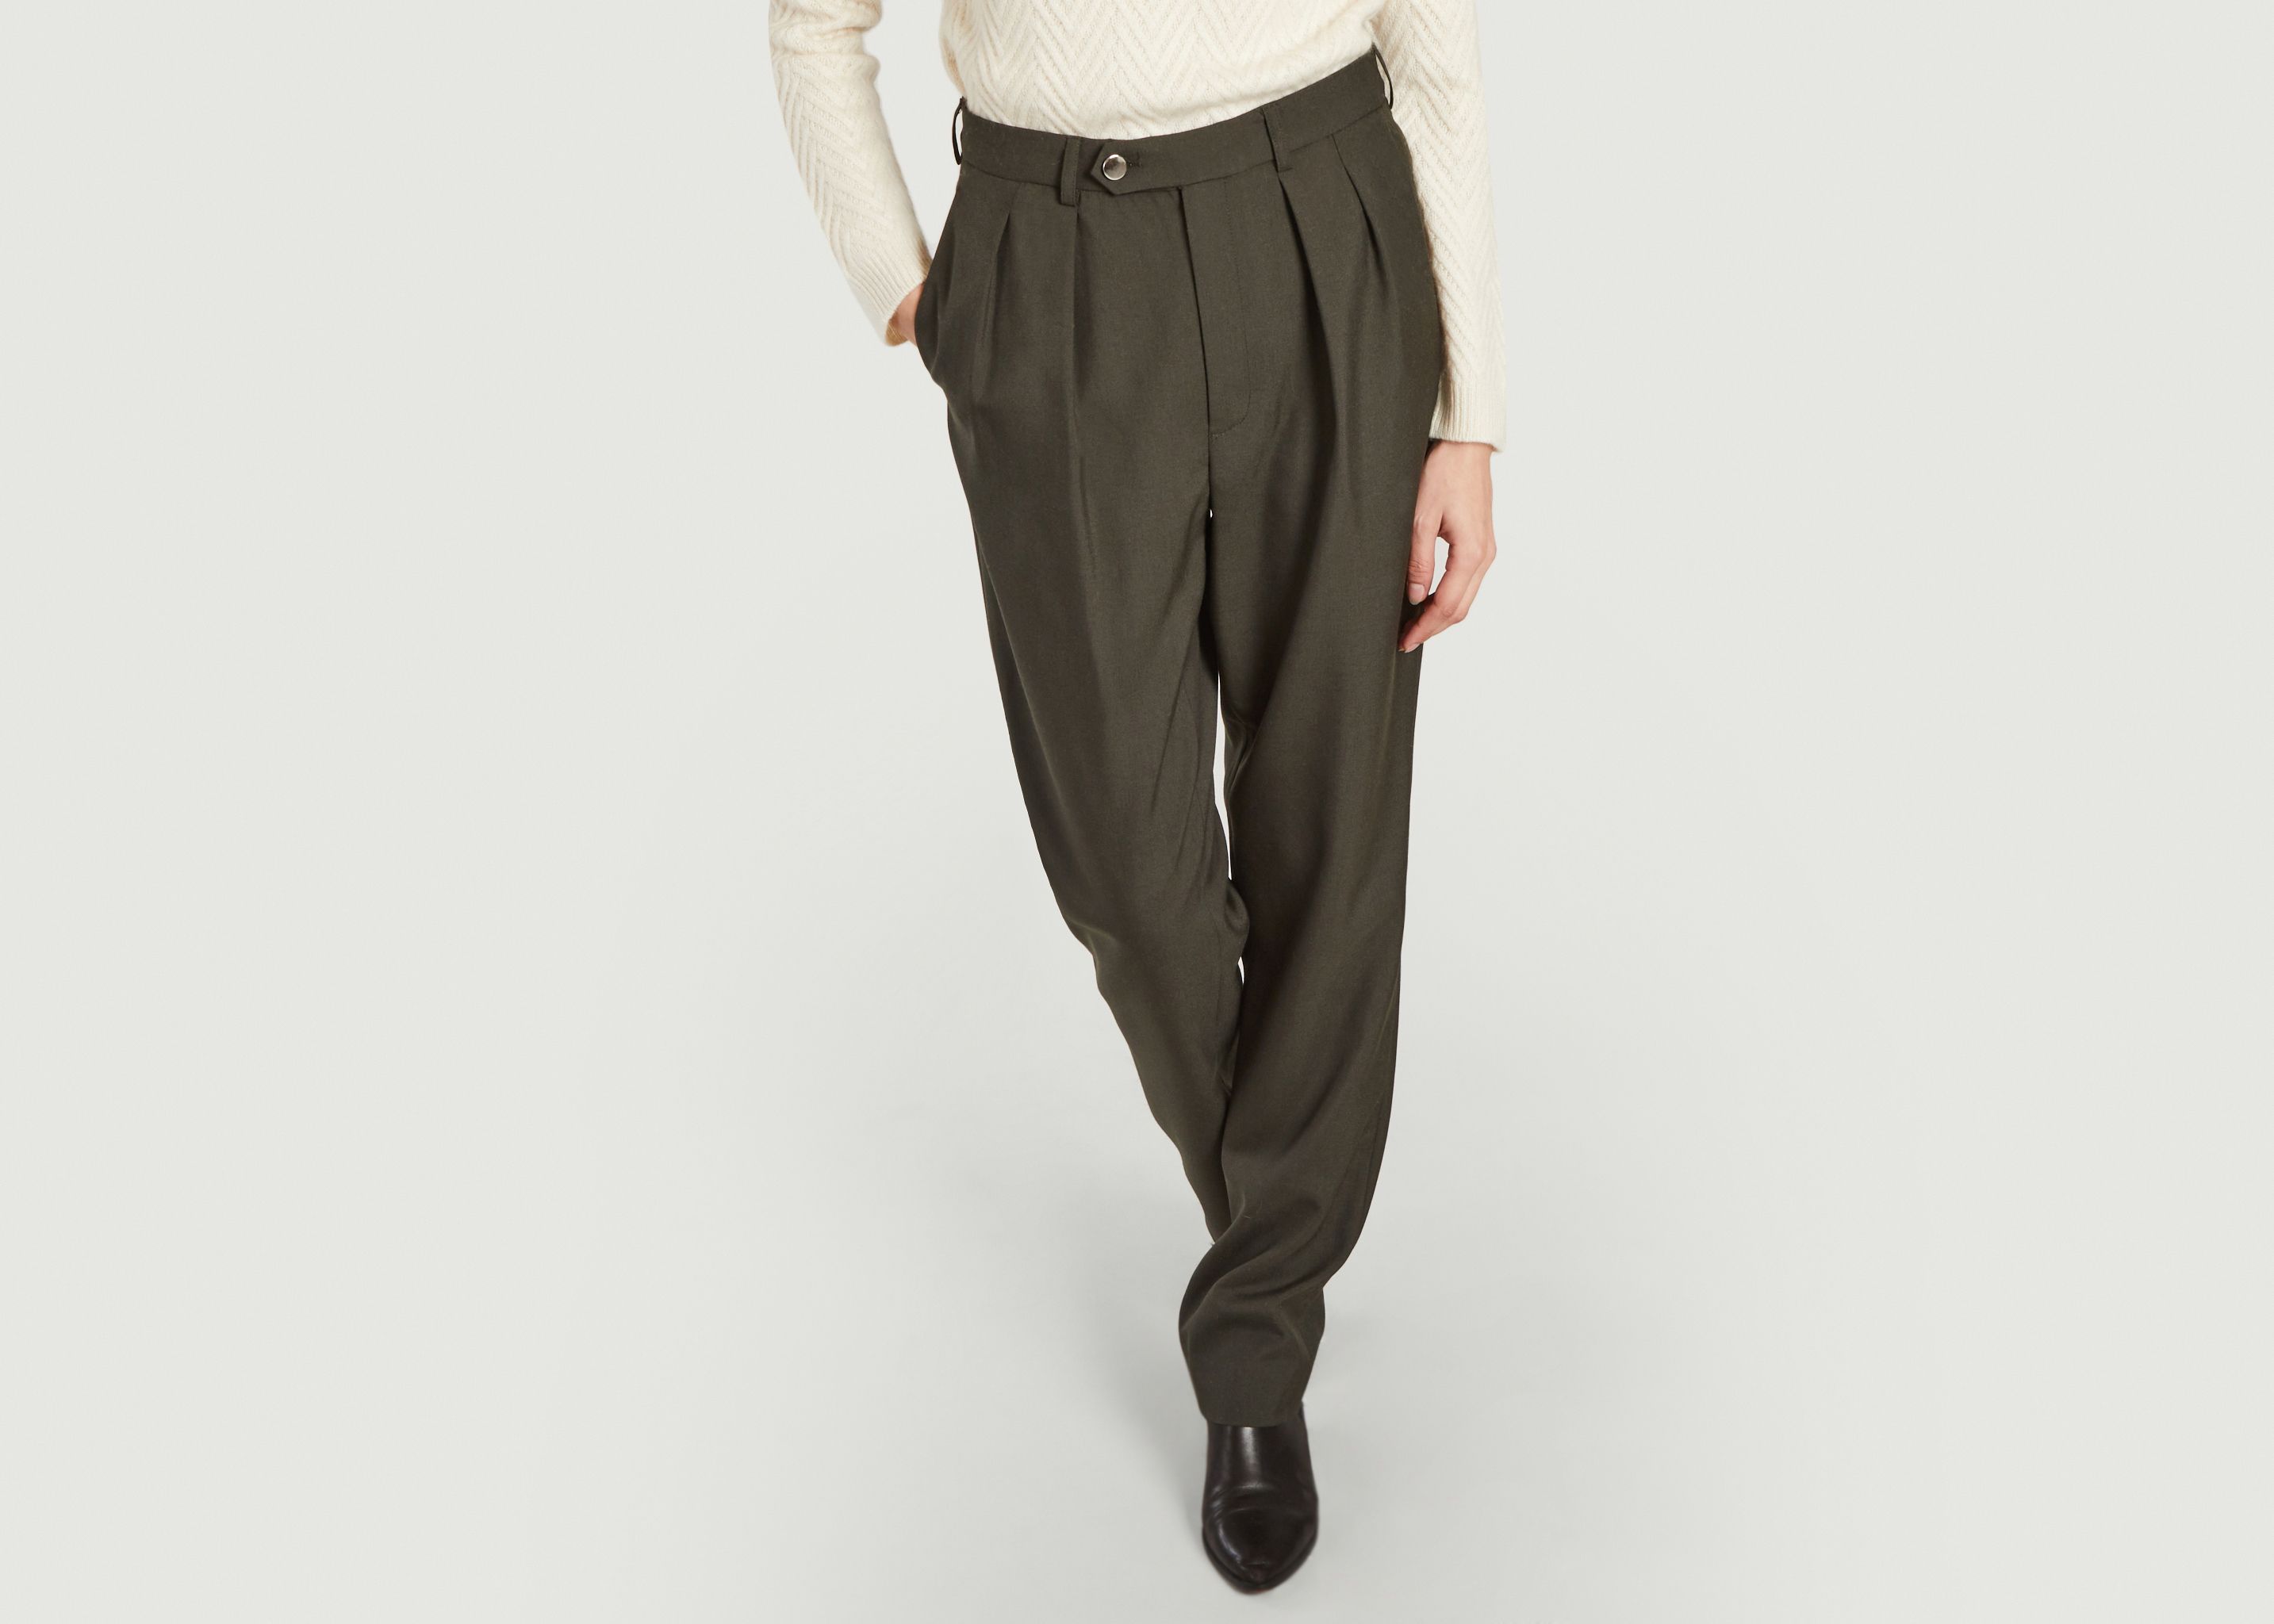 Taylor trousers - Roseanna